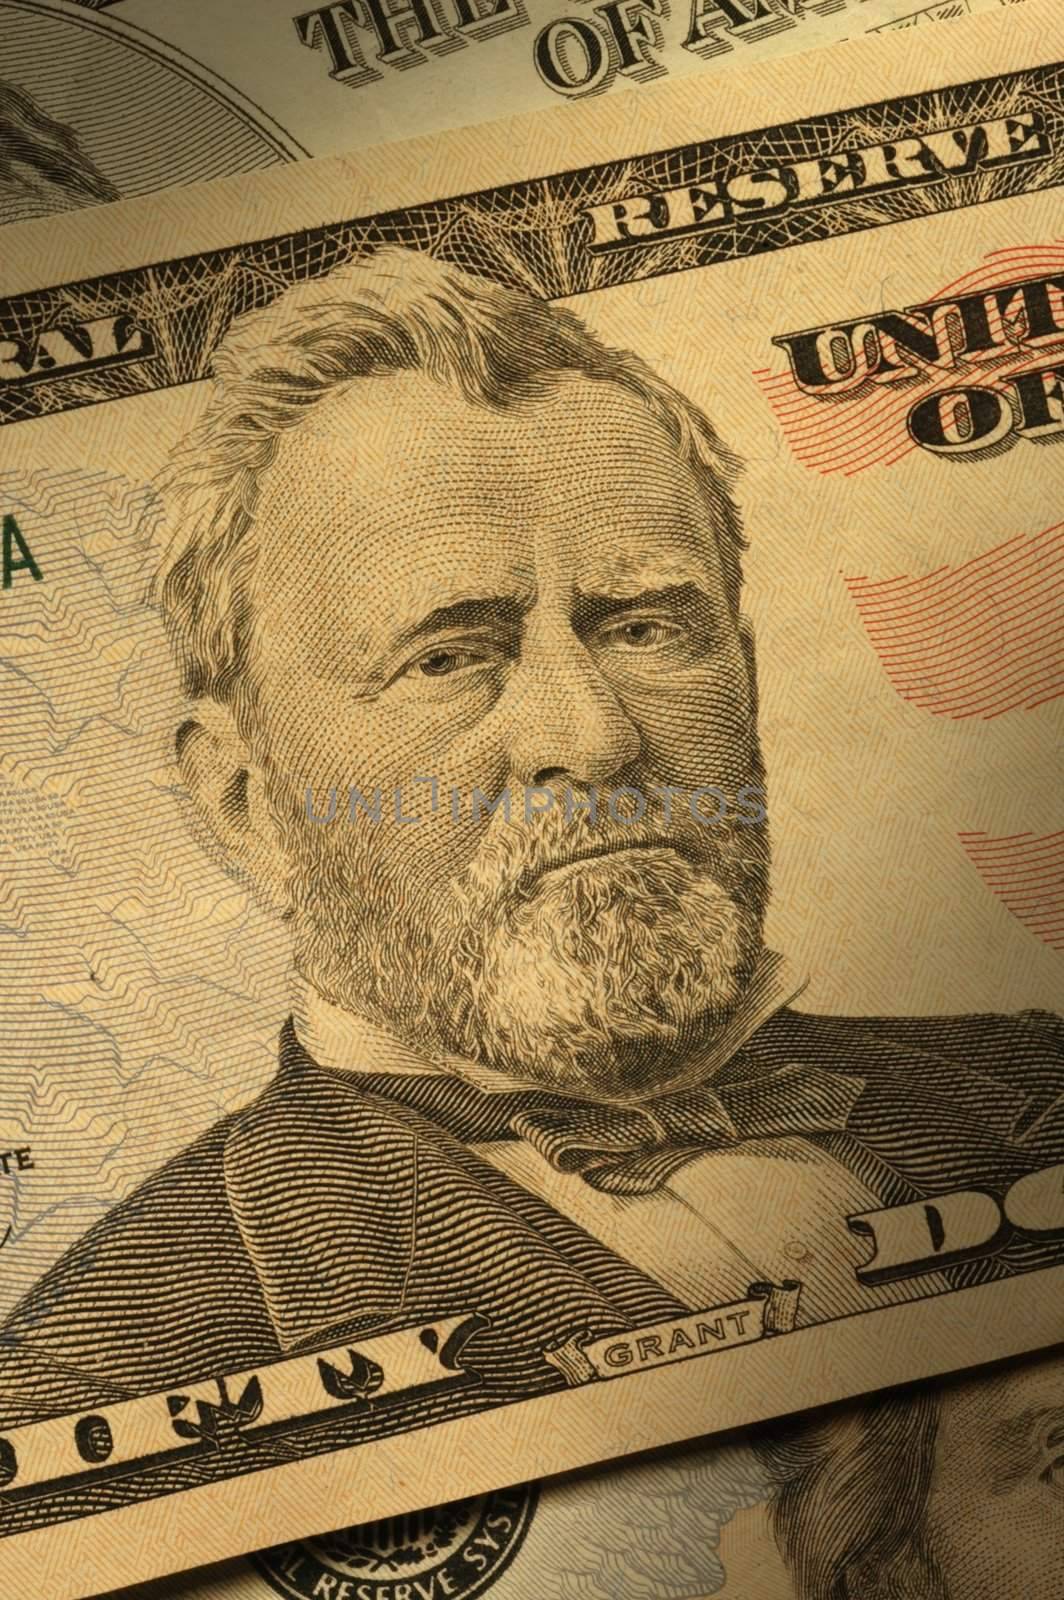 Close-up of Ulysses S. Grant on the $50 bill, dramatically lit.